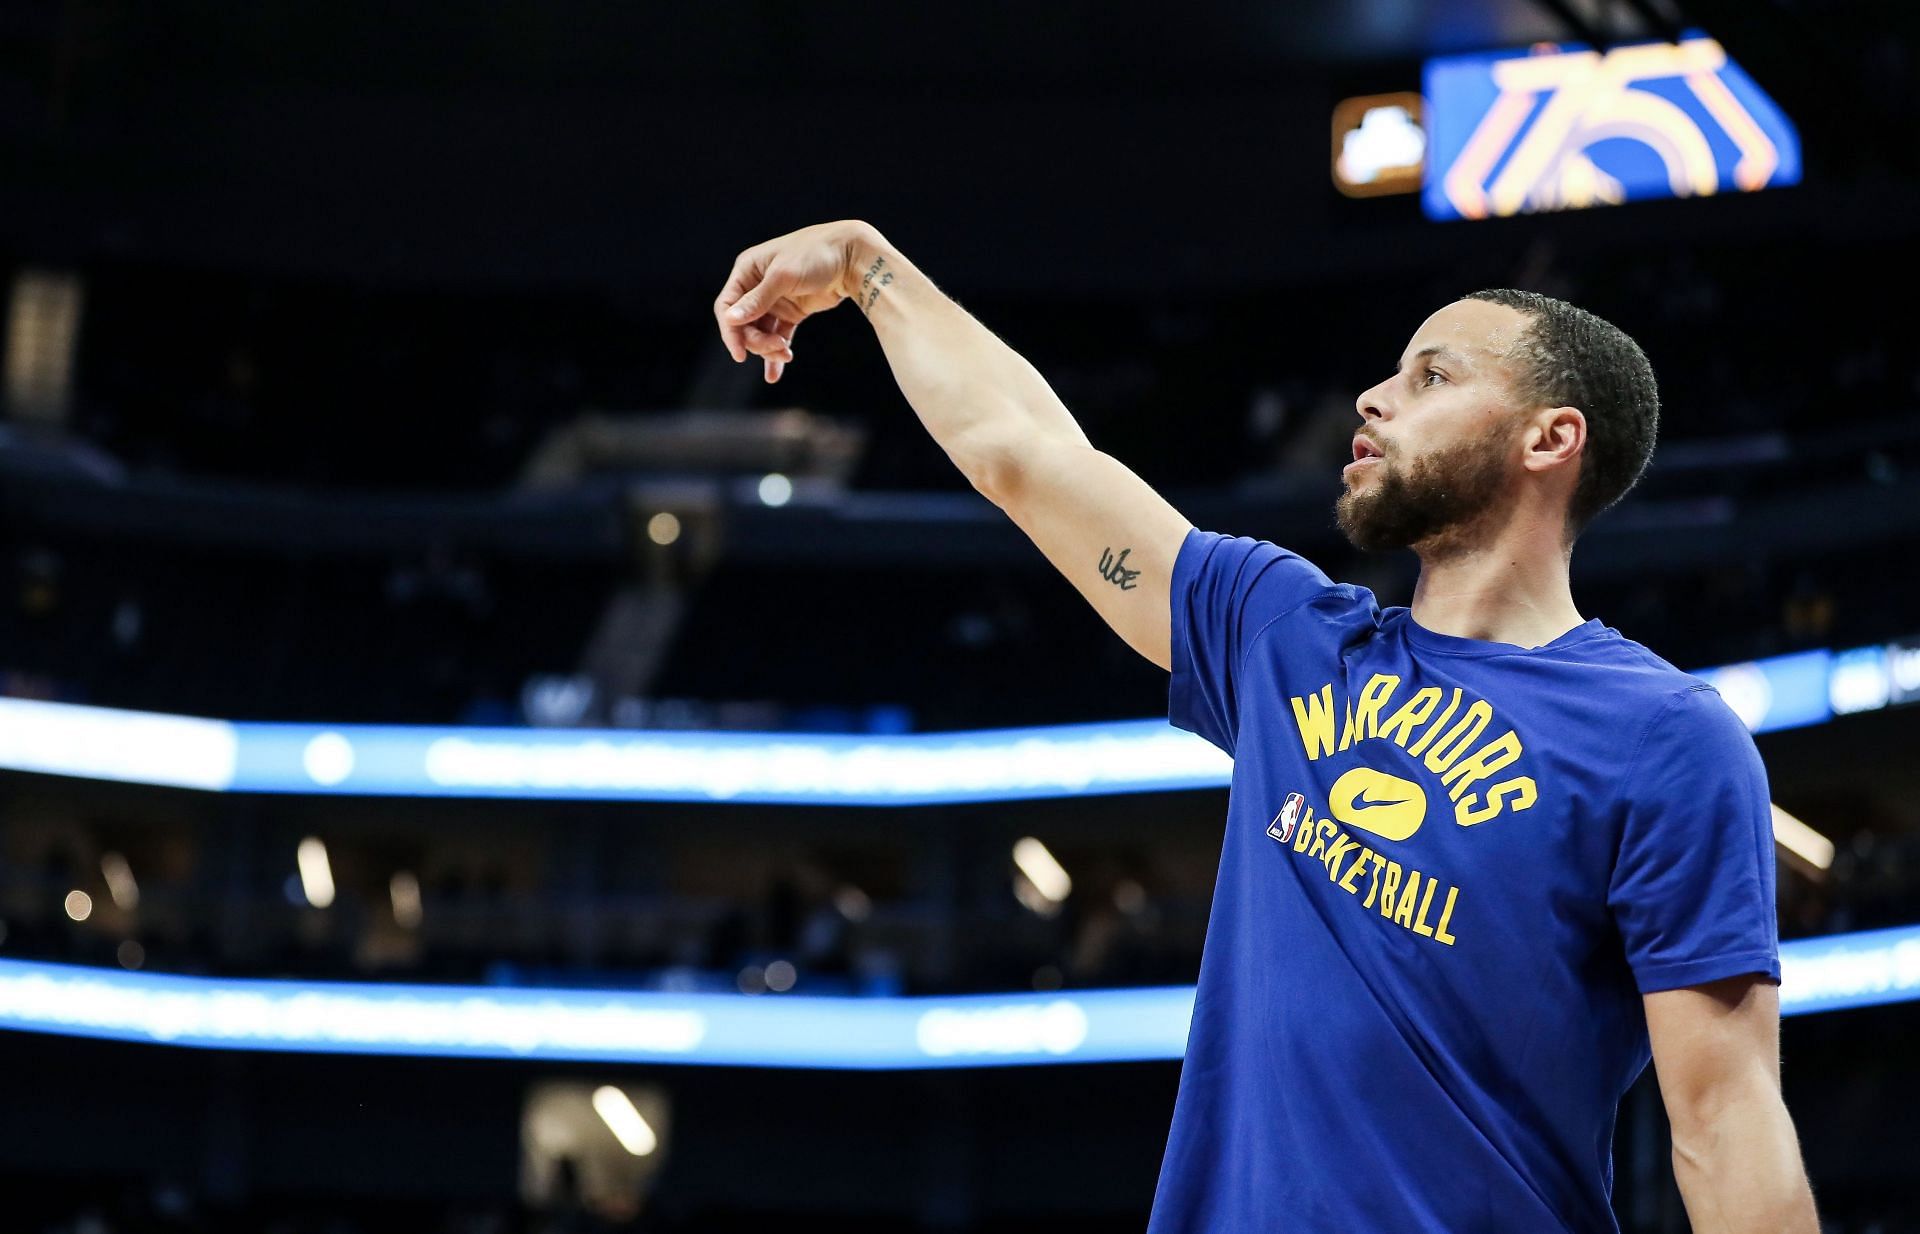 Steph Curry of the Golden State Warriors warms up before a game against the Brooklyn Nets on Jan. 29 in San Francisco, California.